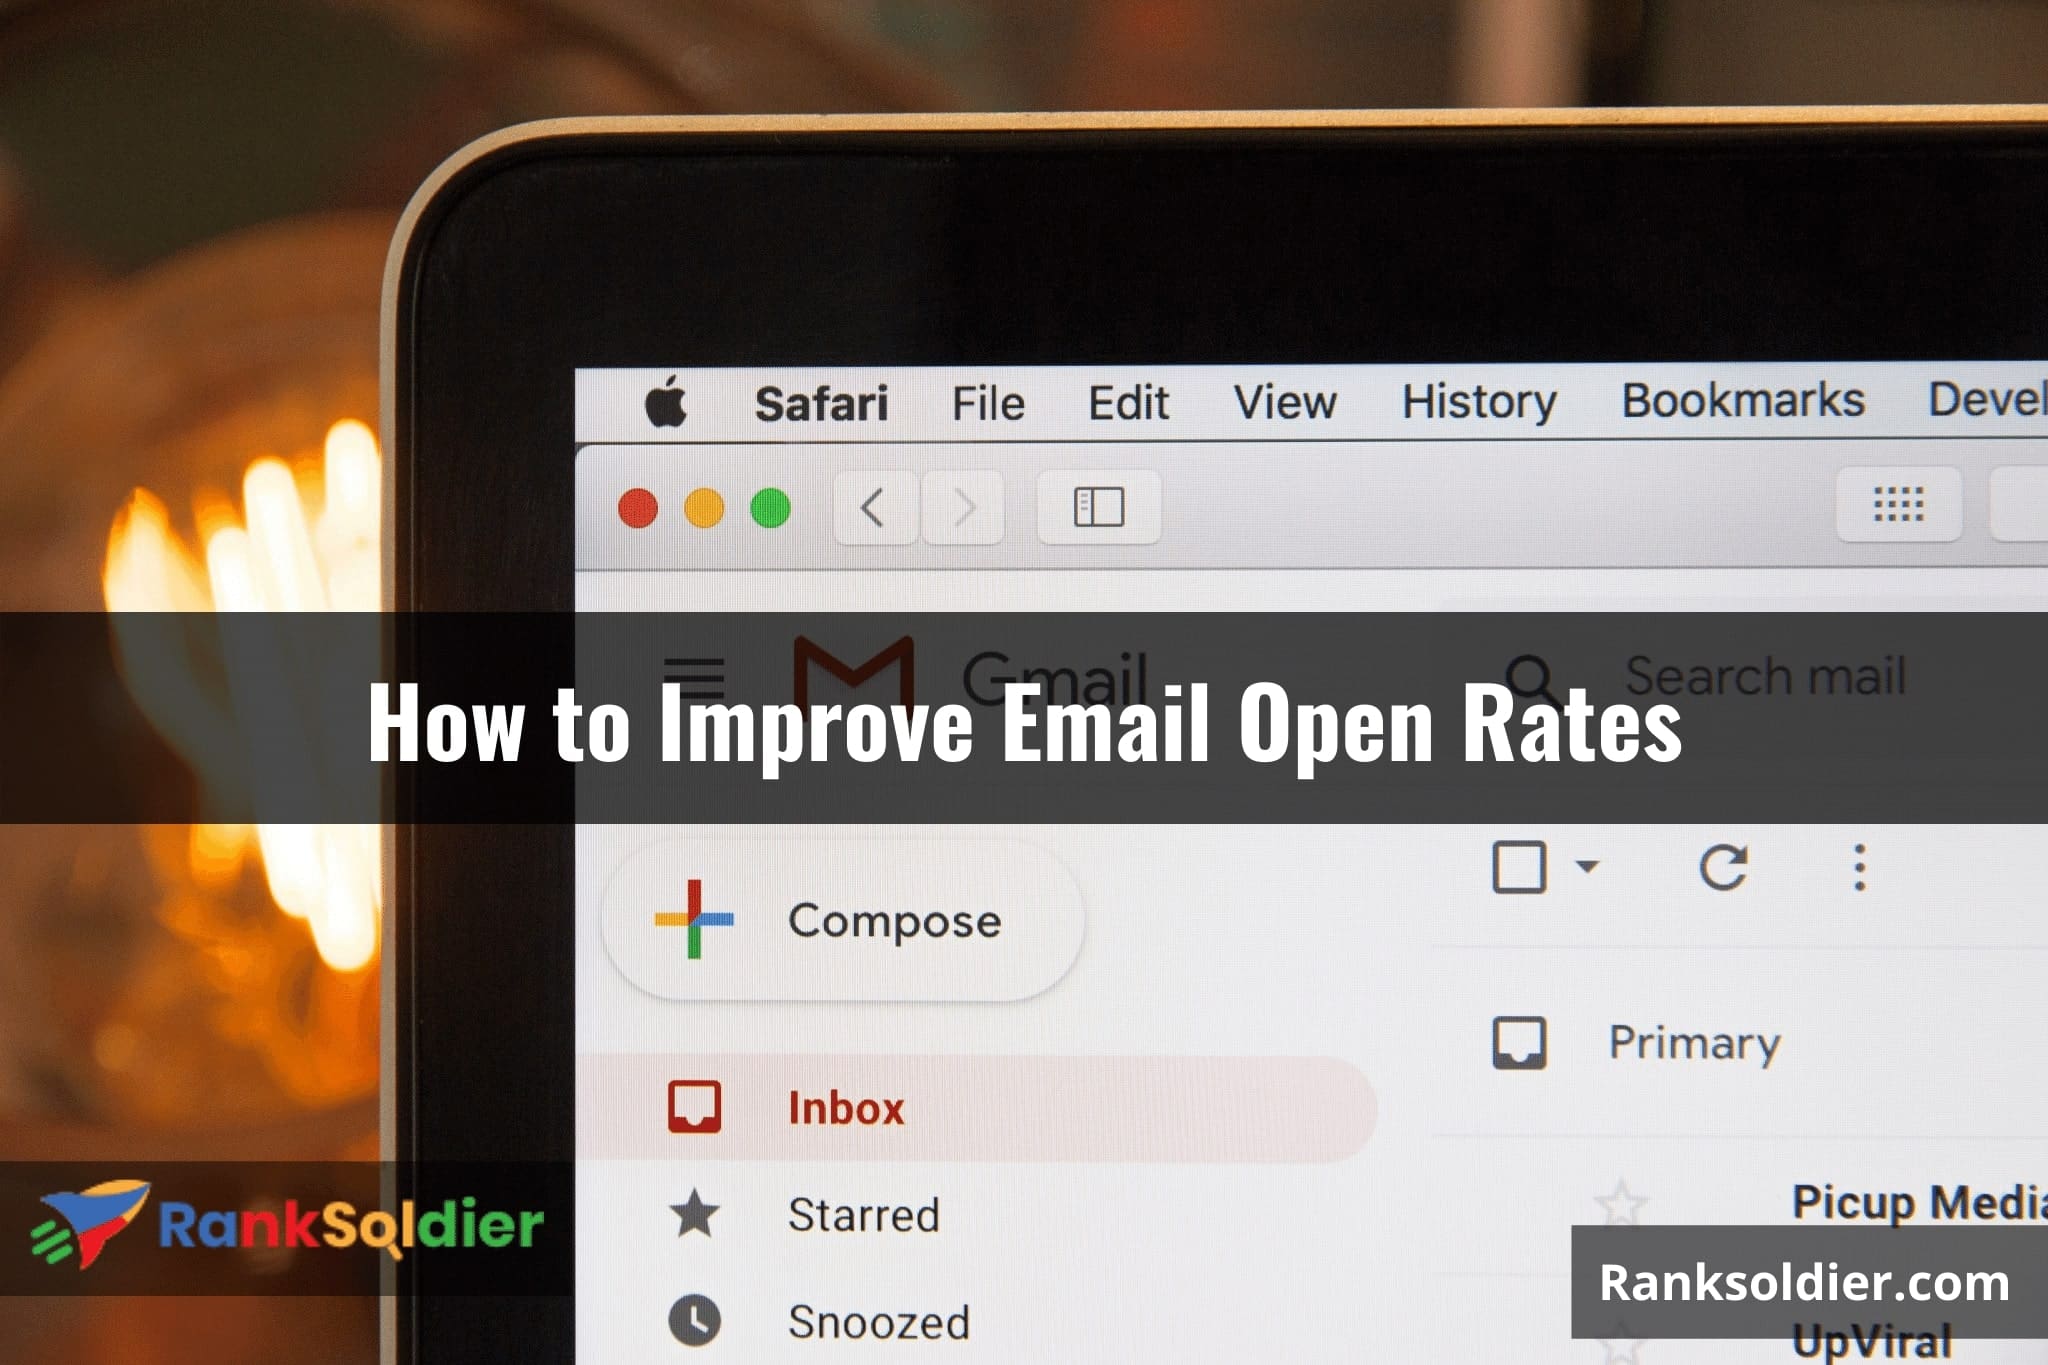 How to Improve Email Open Rates